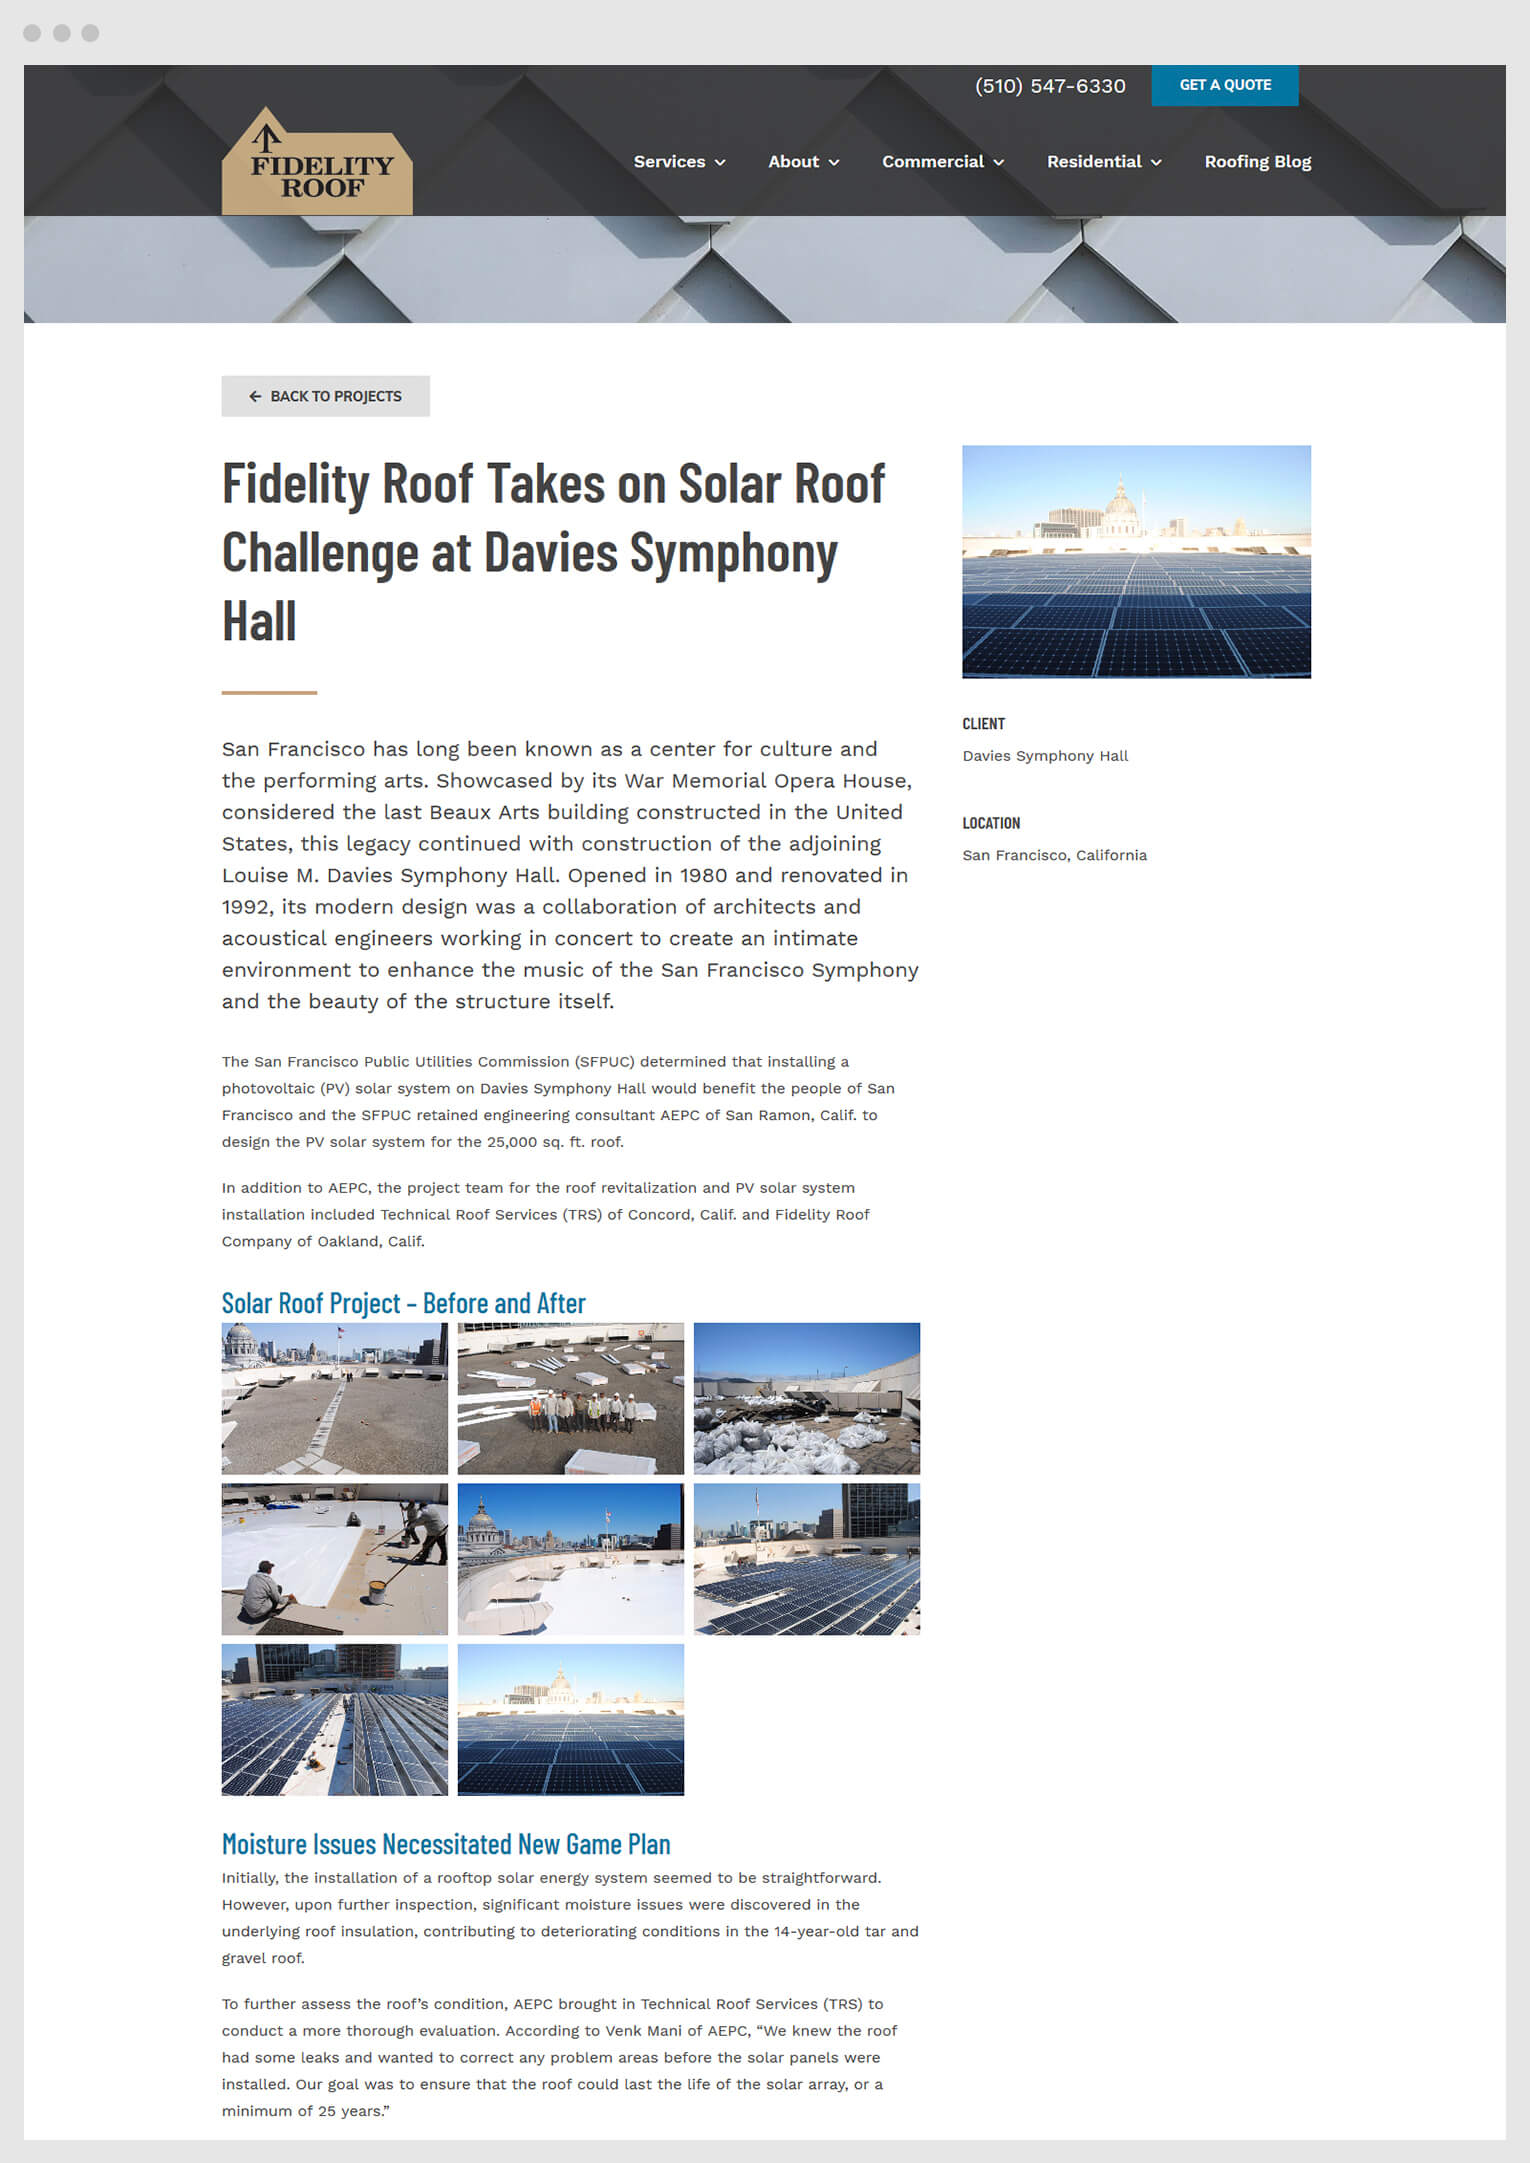 Screenshot of the Fidelity Roof commercial case study detail page